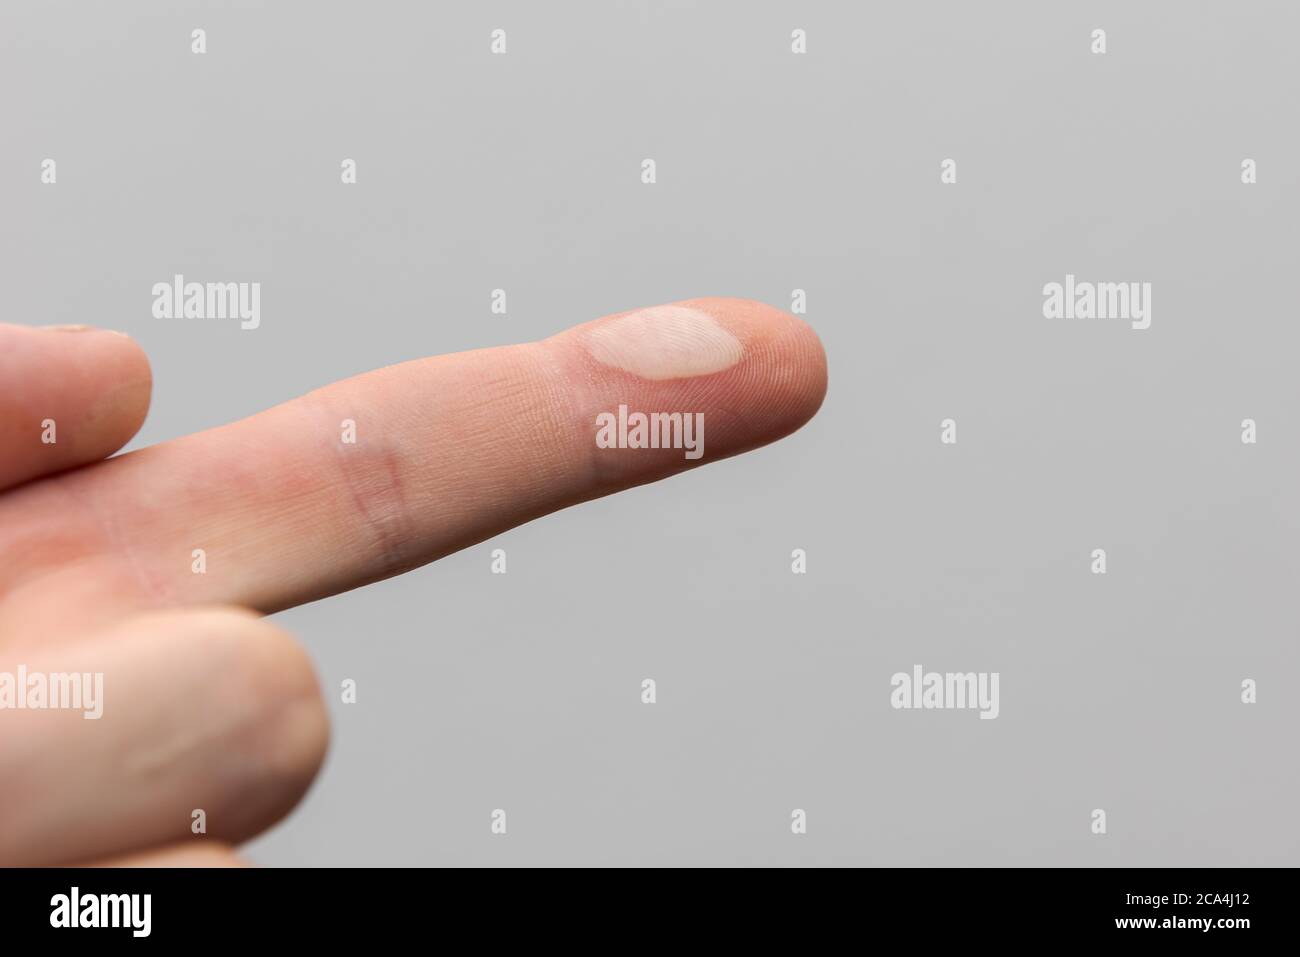 Index finger of human hand with painful blister on fingertip from touching hot pan isolated on white background Stock Photo